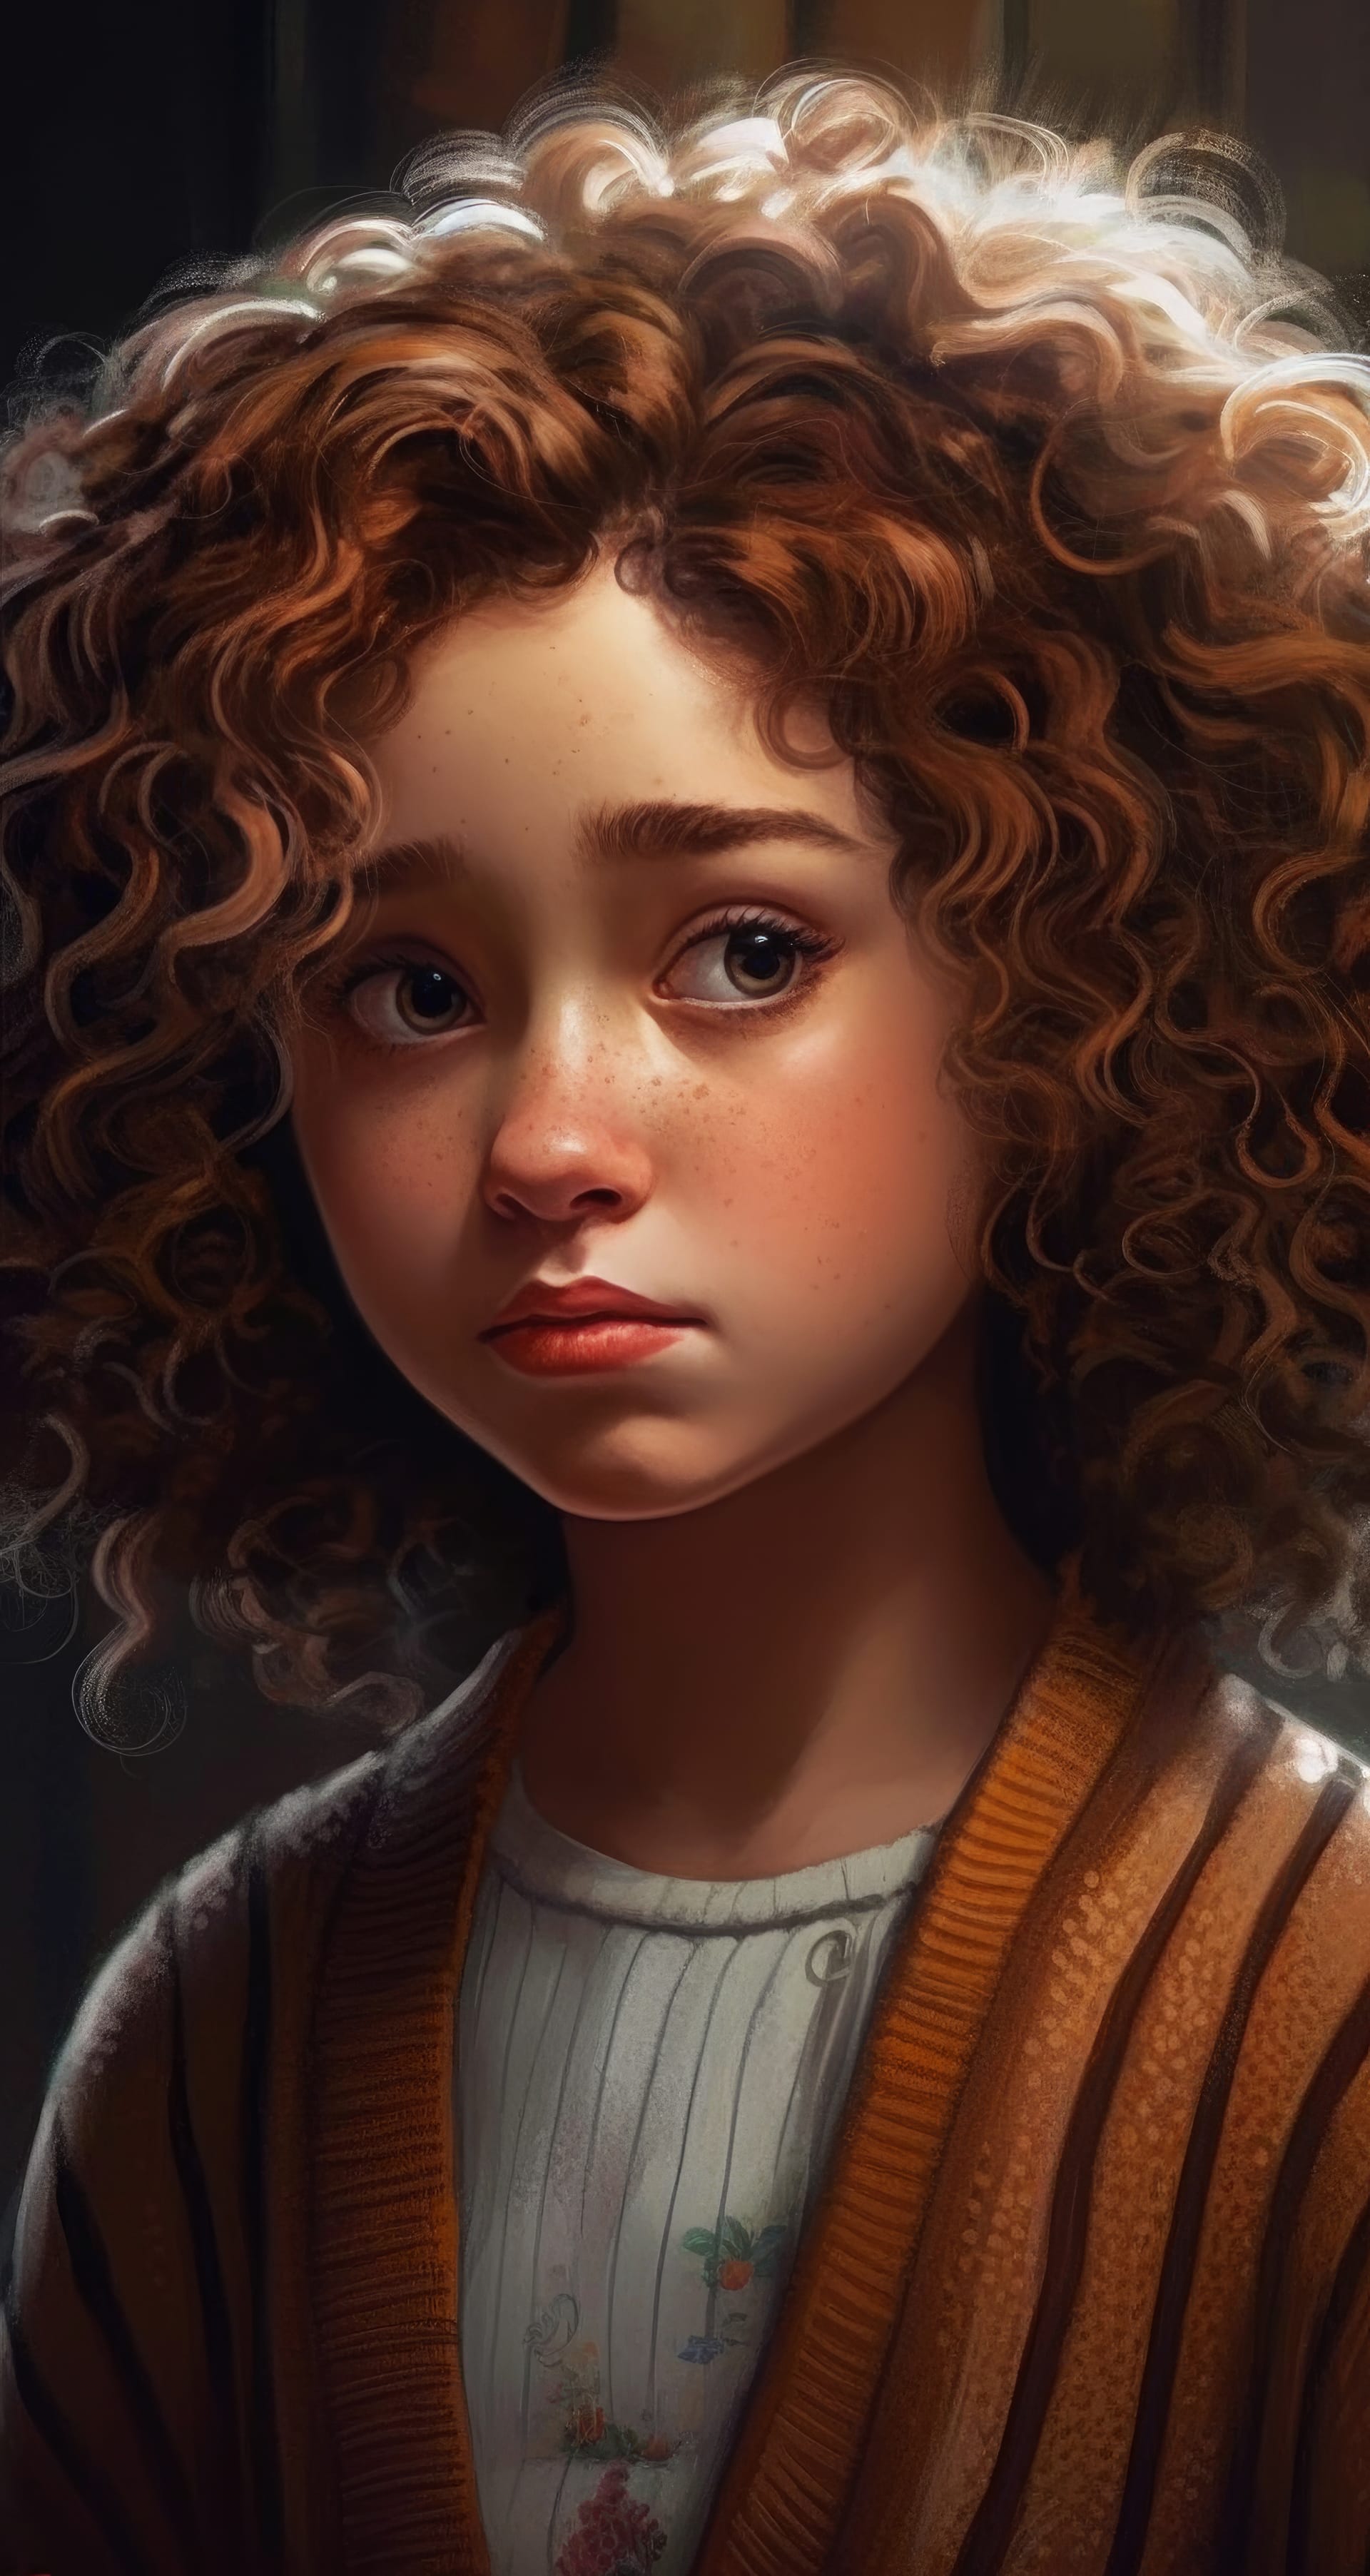 Best pfp for instagram beautiful painting girl with curly hair